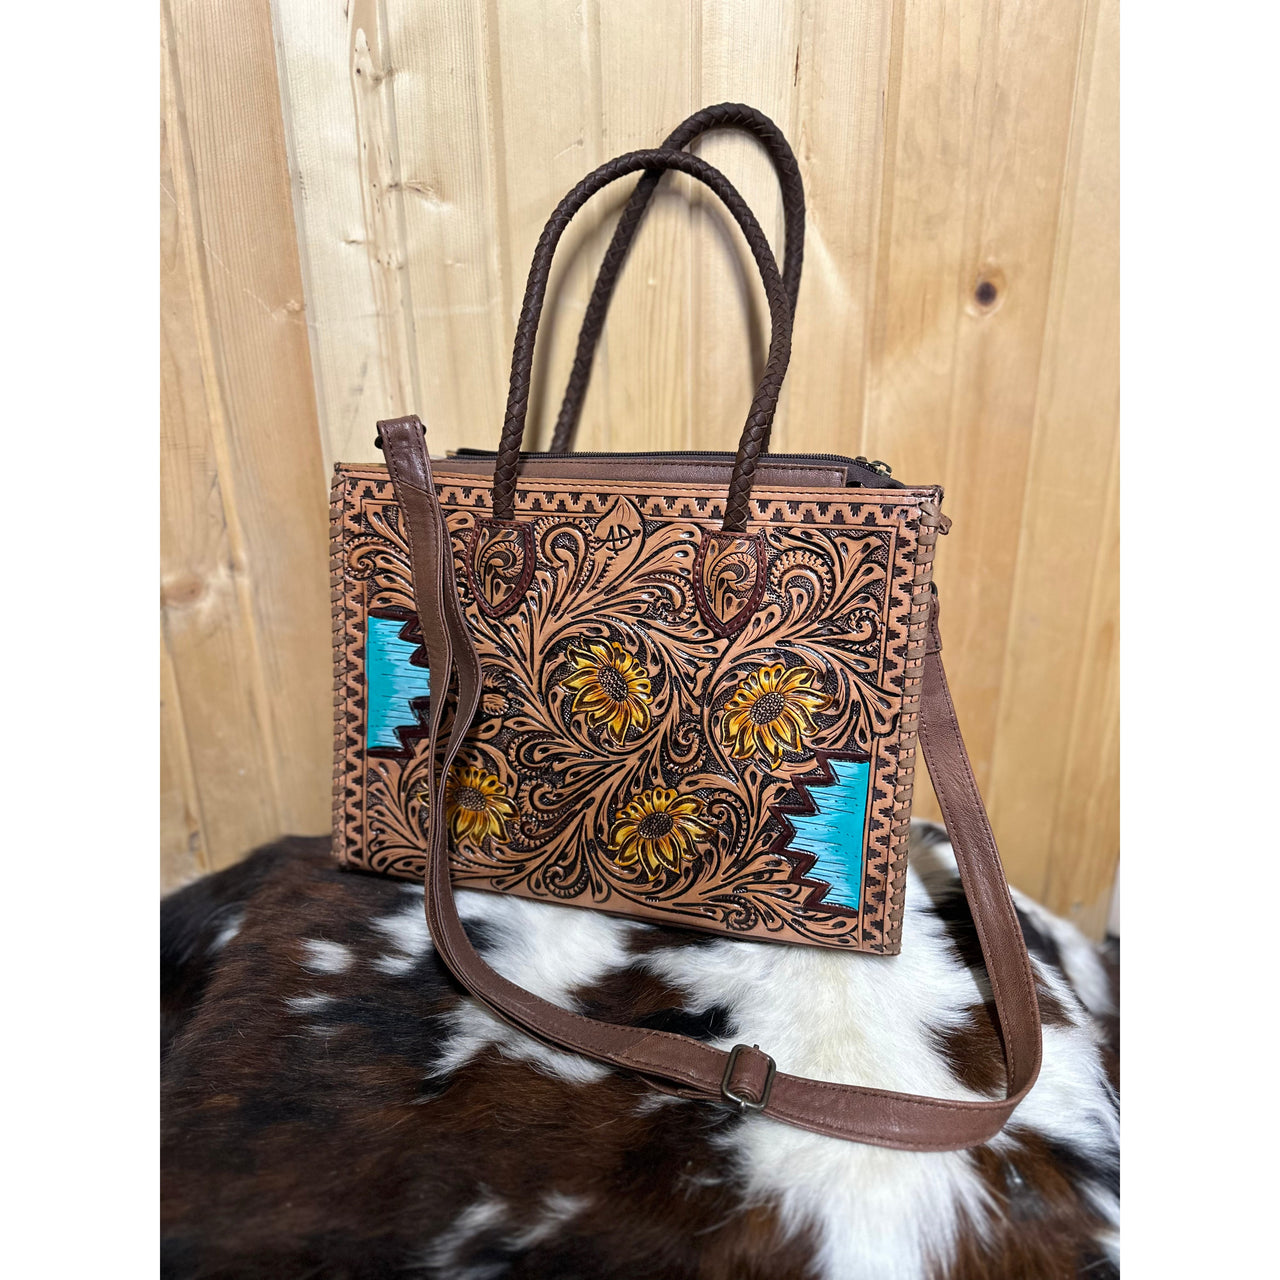 American Darling Floral Tooled Shoulder Bag - Turquoise Aztec w/Sunflowers